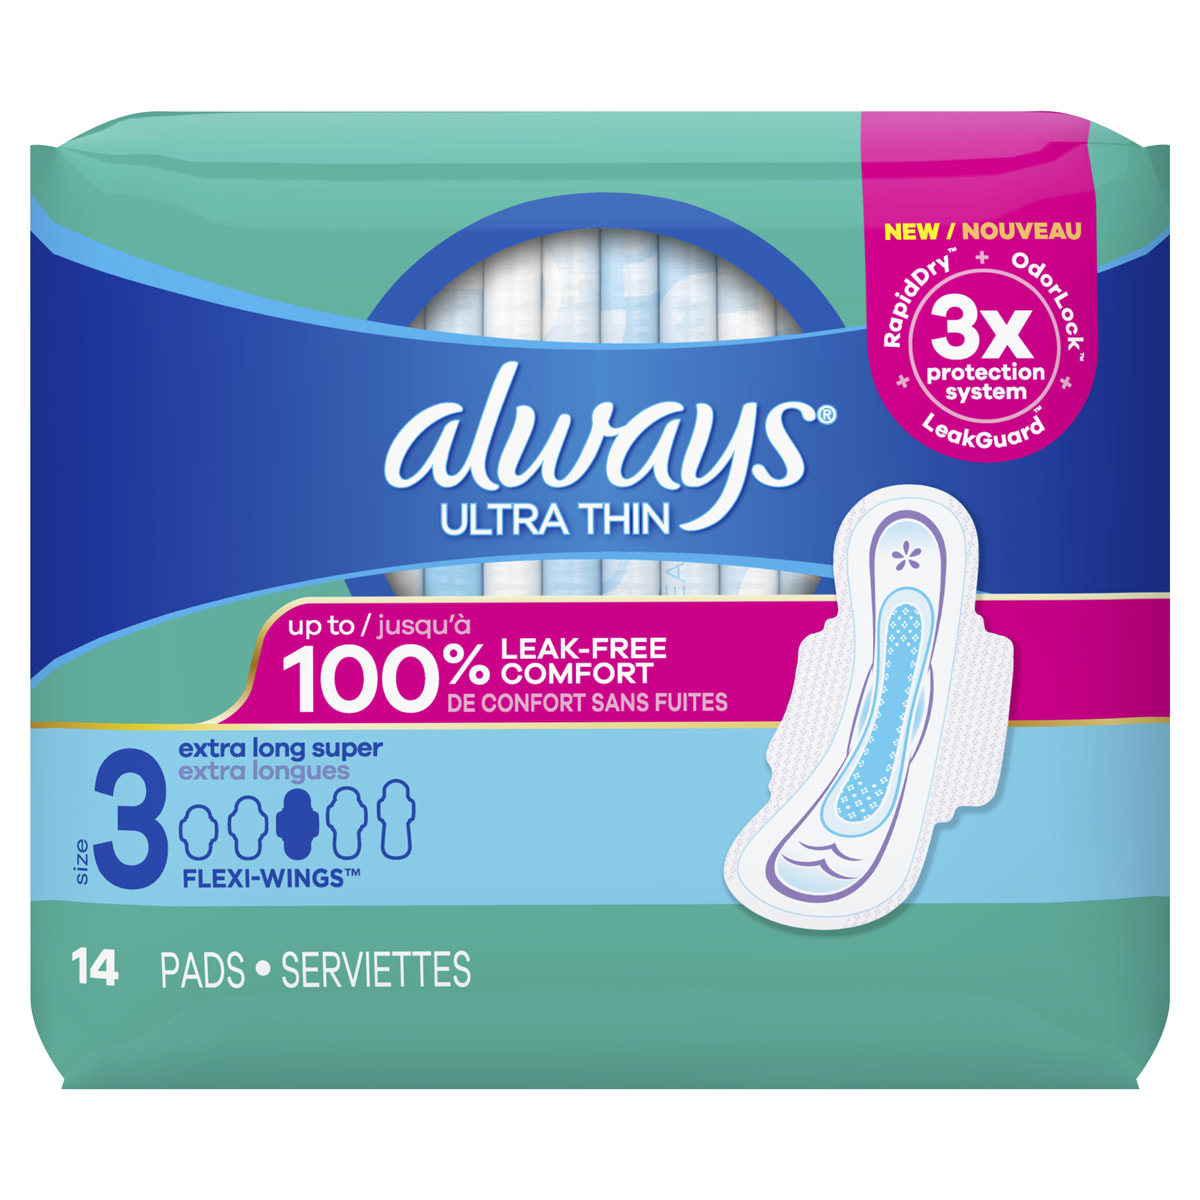 Always Infinity Flexfoam Pads For Women - Extra Heavy Absorbency -  Unscented - Size 3 - 28ct : Target